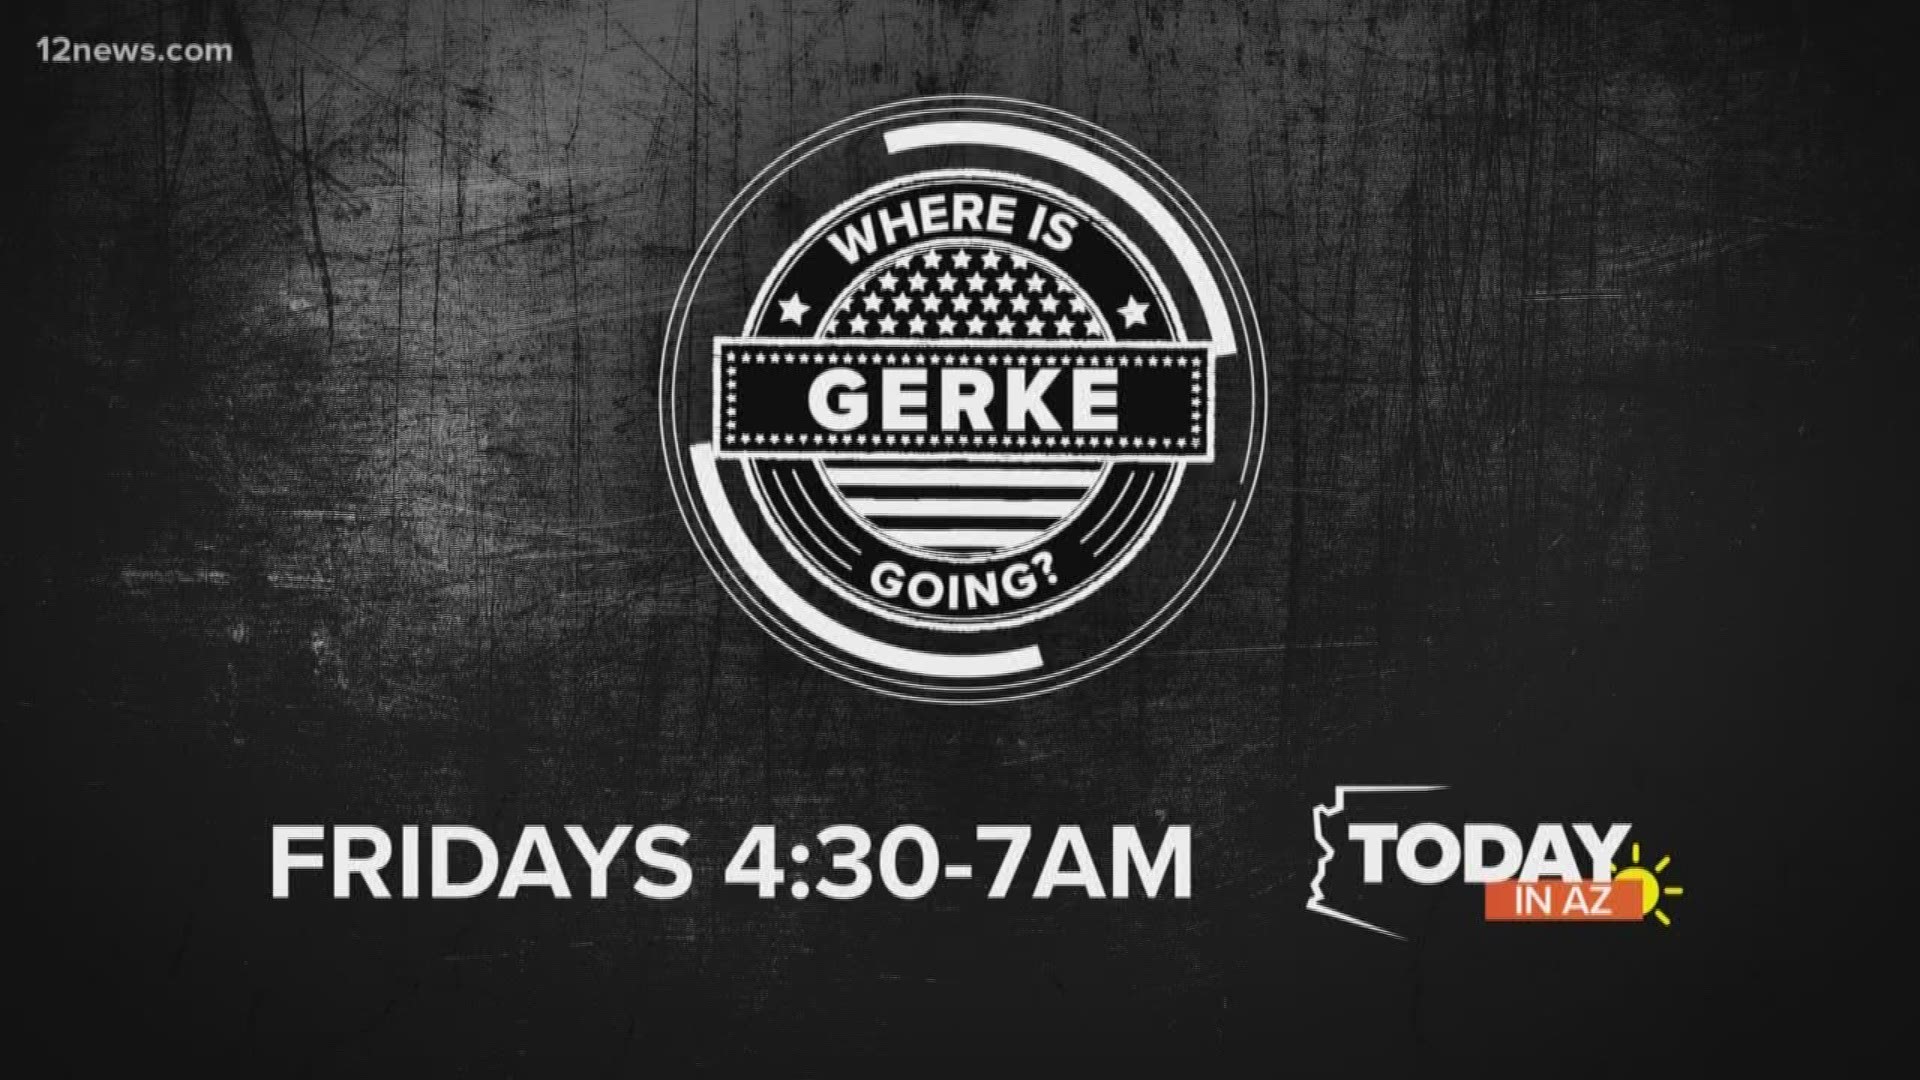 Paul Gerke is hitting the road for our Where is Gerke Going series! The first destination will be revealed on April 26.